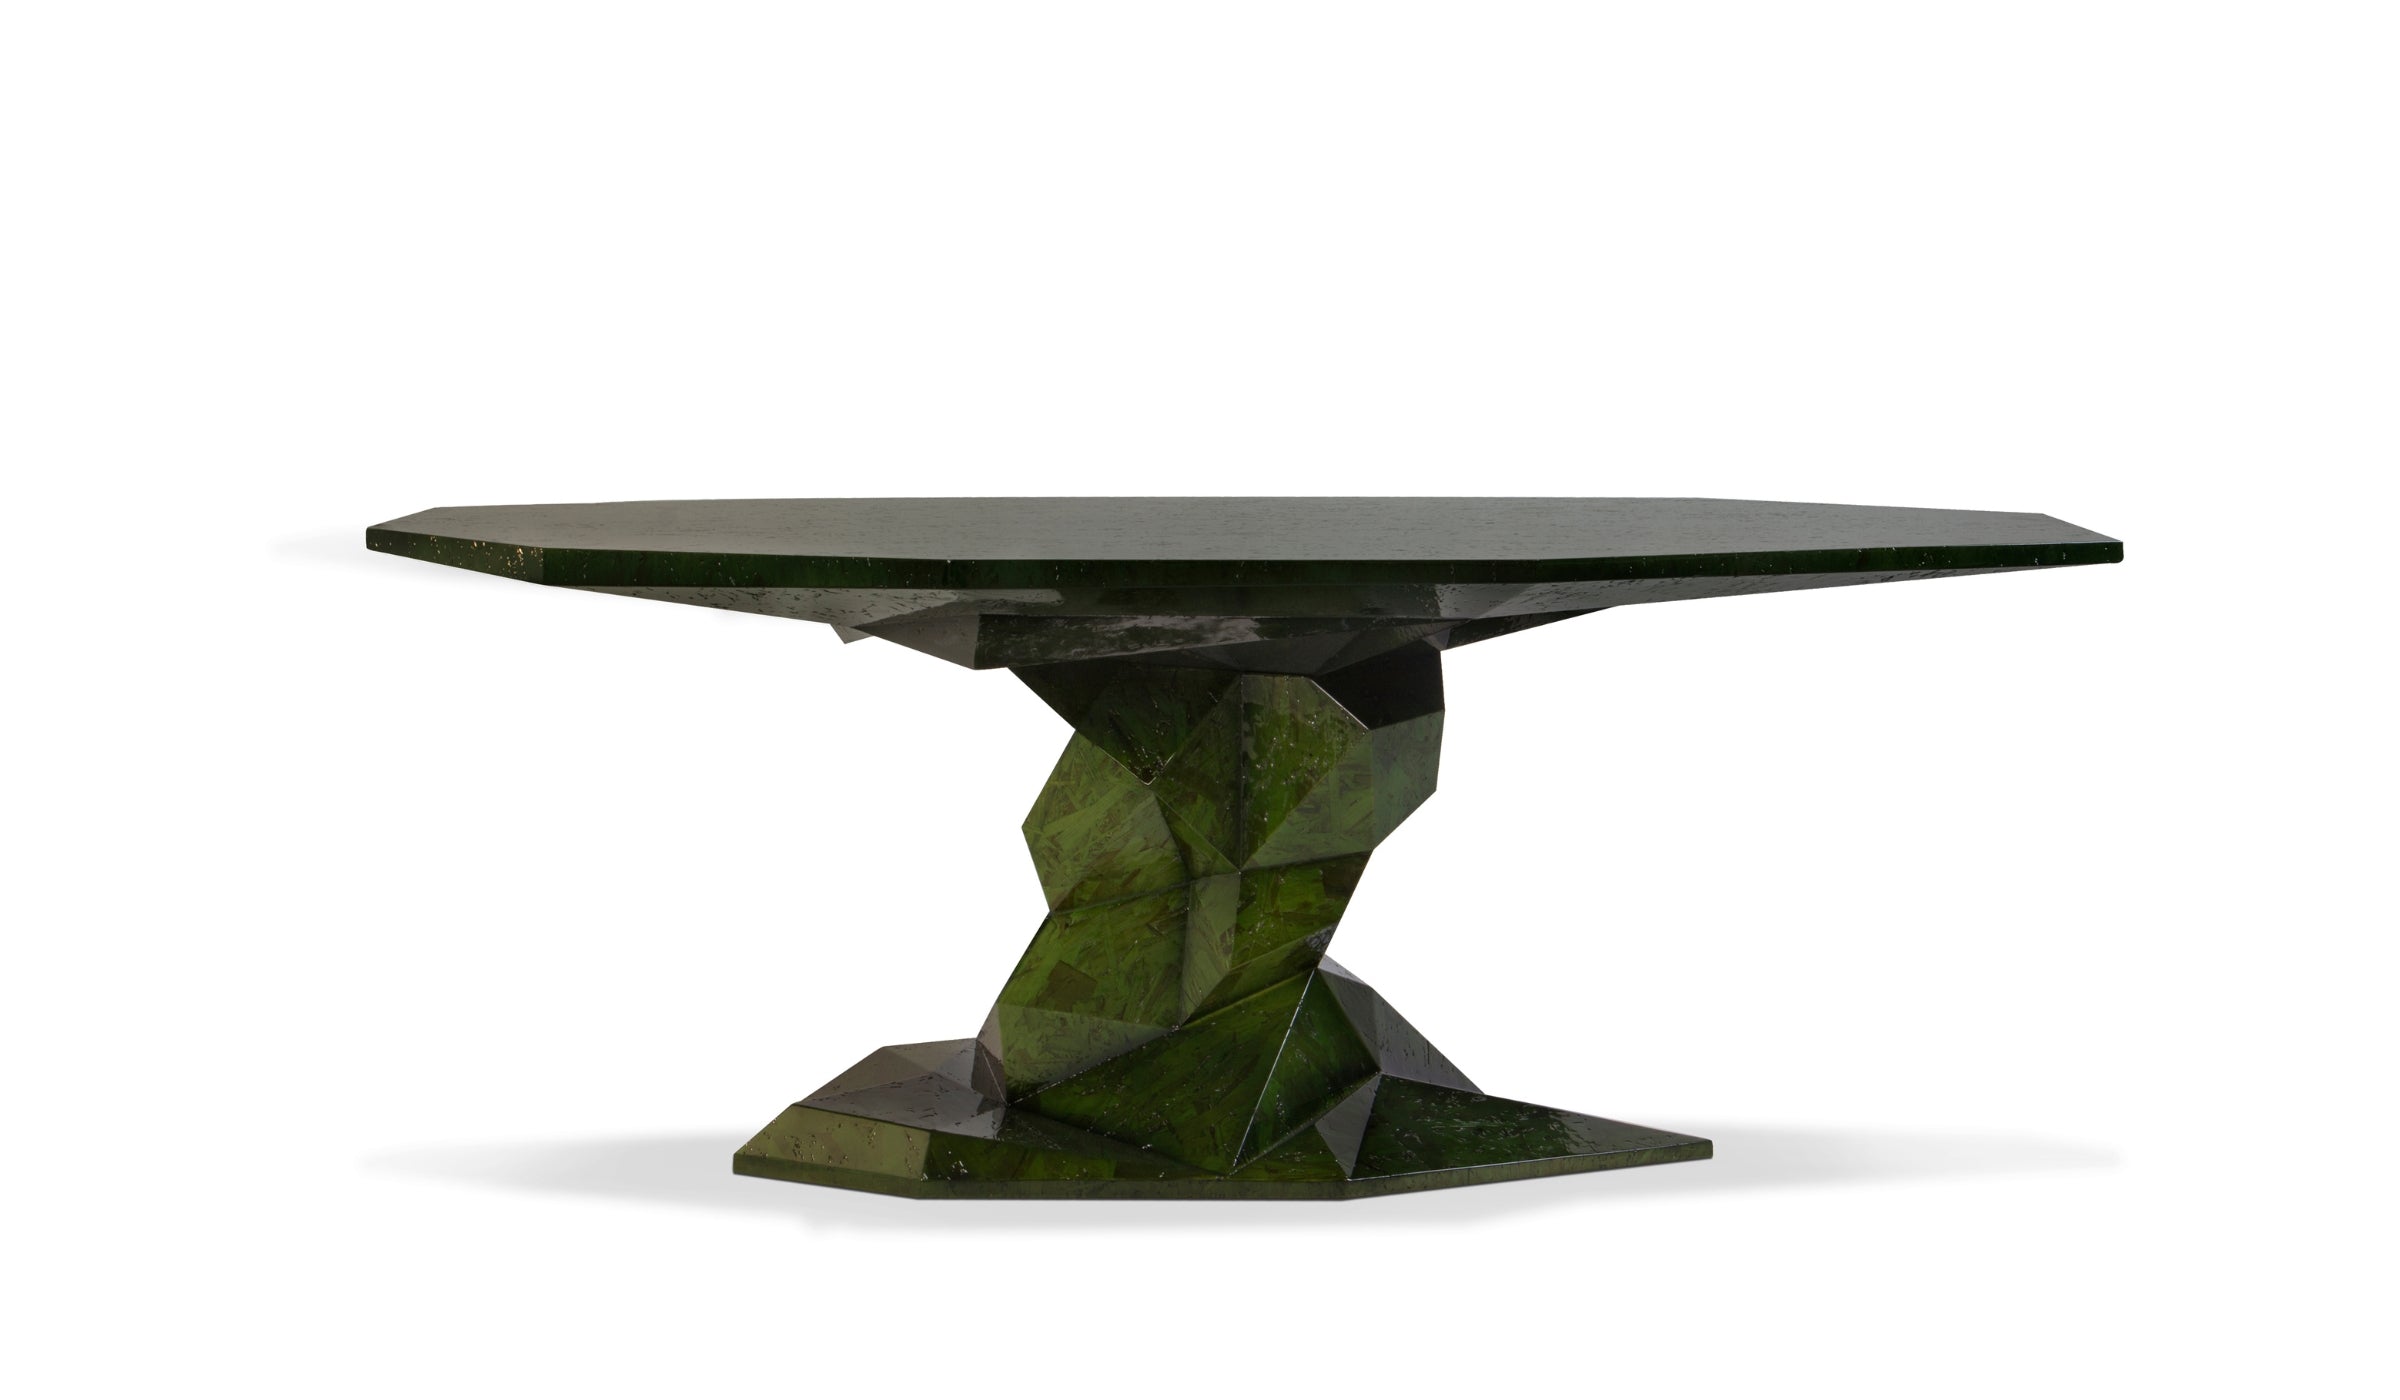 Bonsai - Modern design dining table with luxurious green mahogany finish